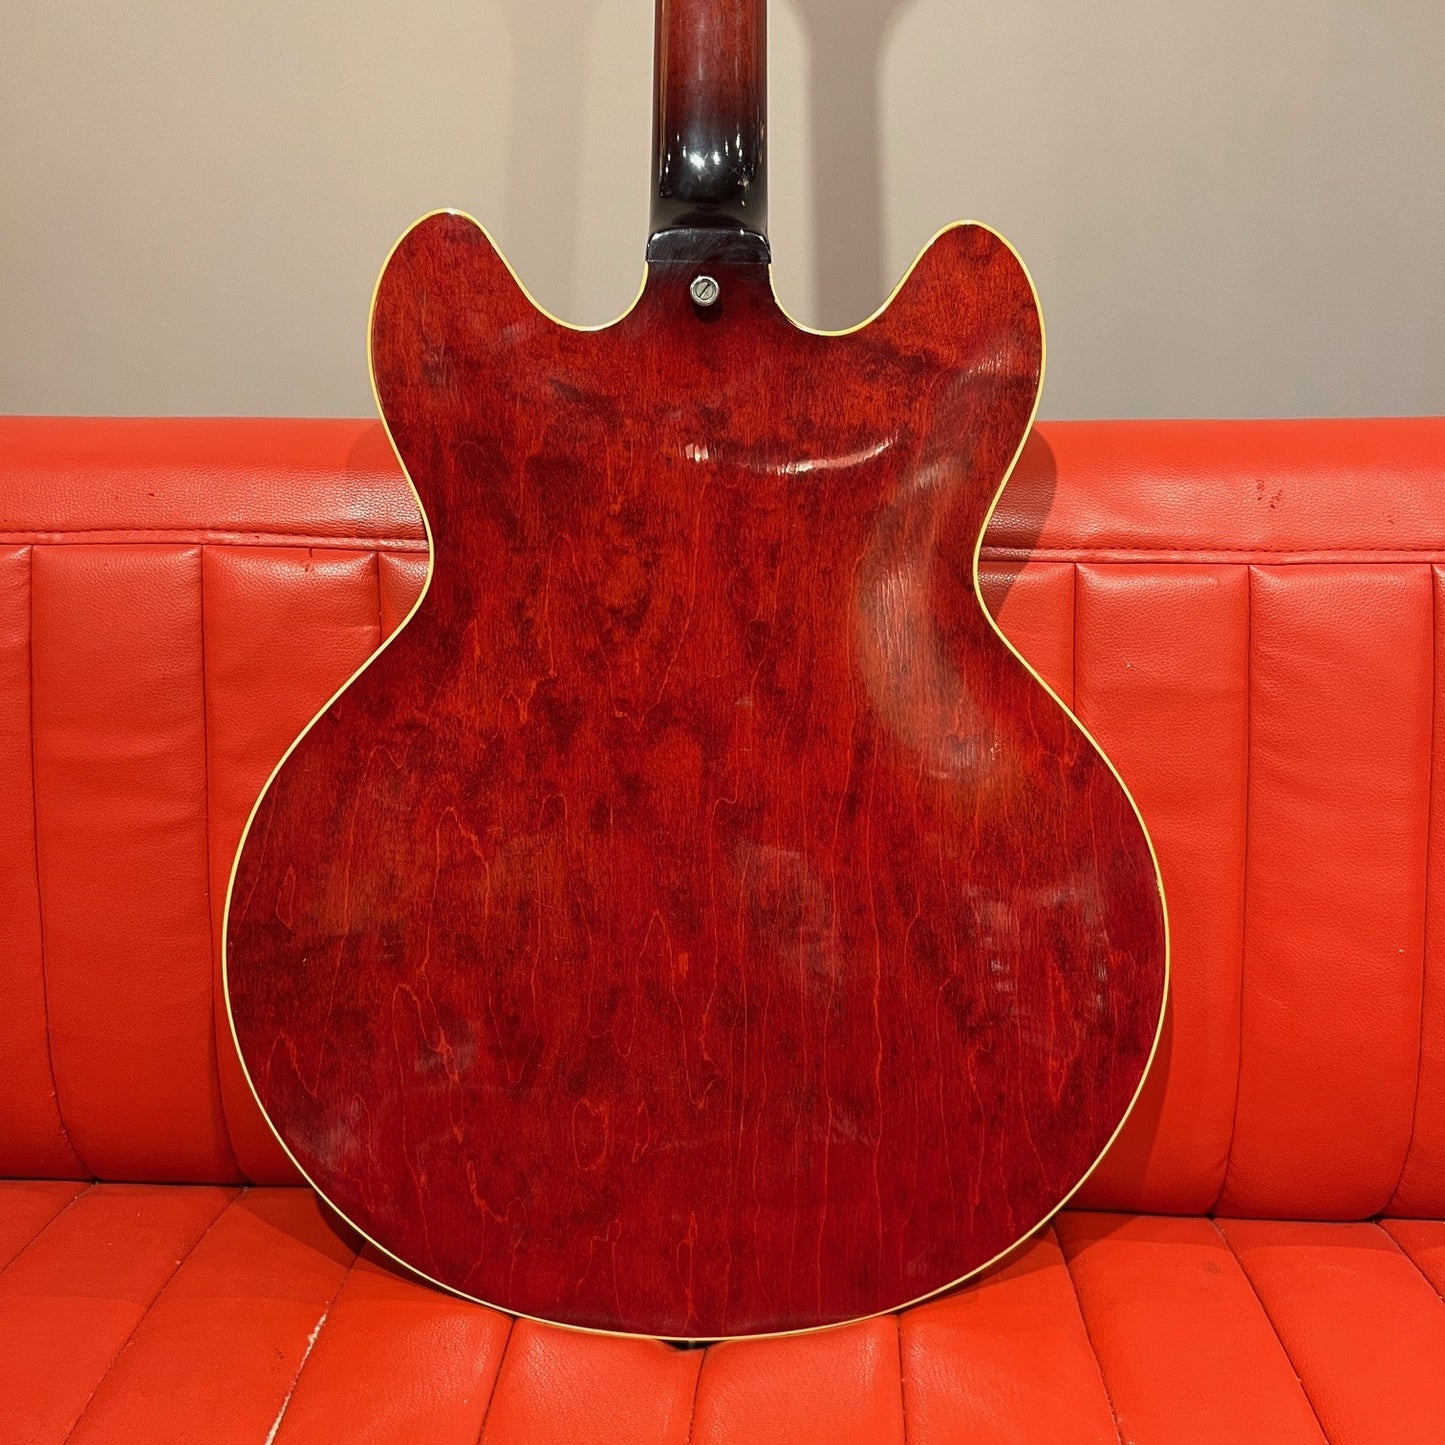 [SN 897414] USED Epiphone / 1967-68 E360TDC 12-String Riviera Cherry [04]